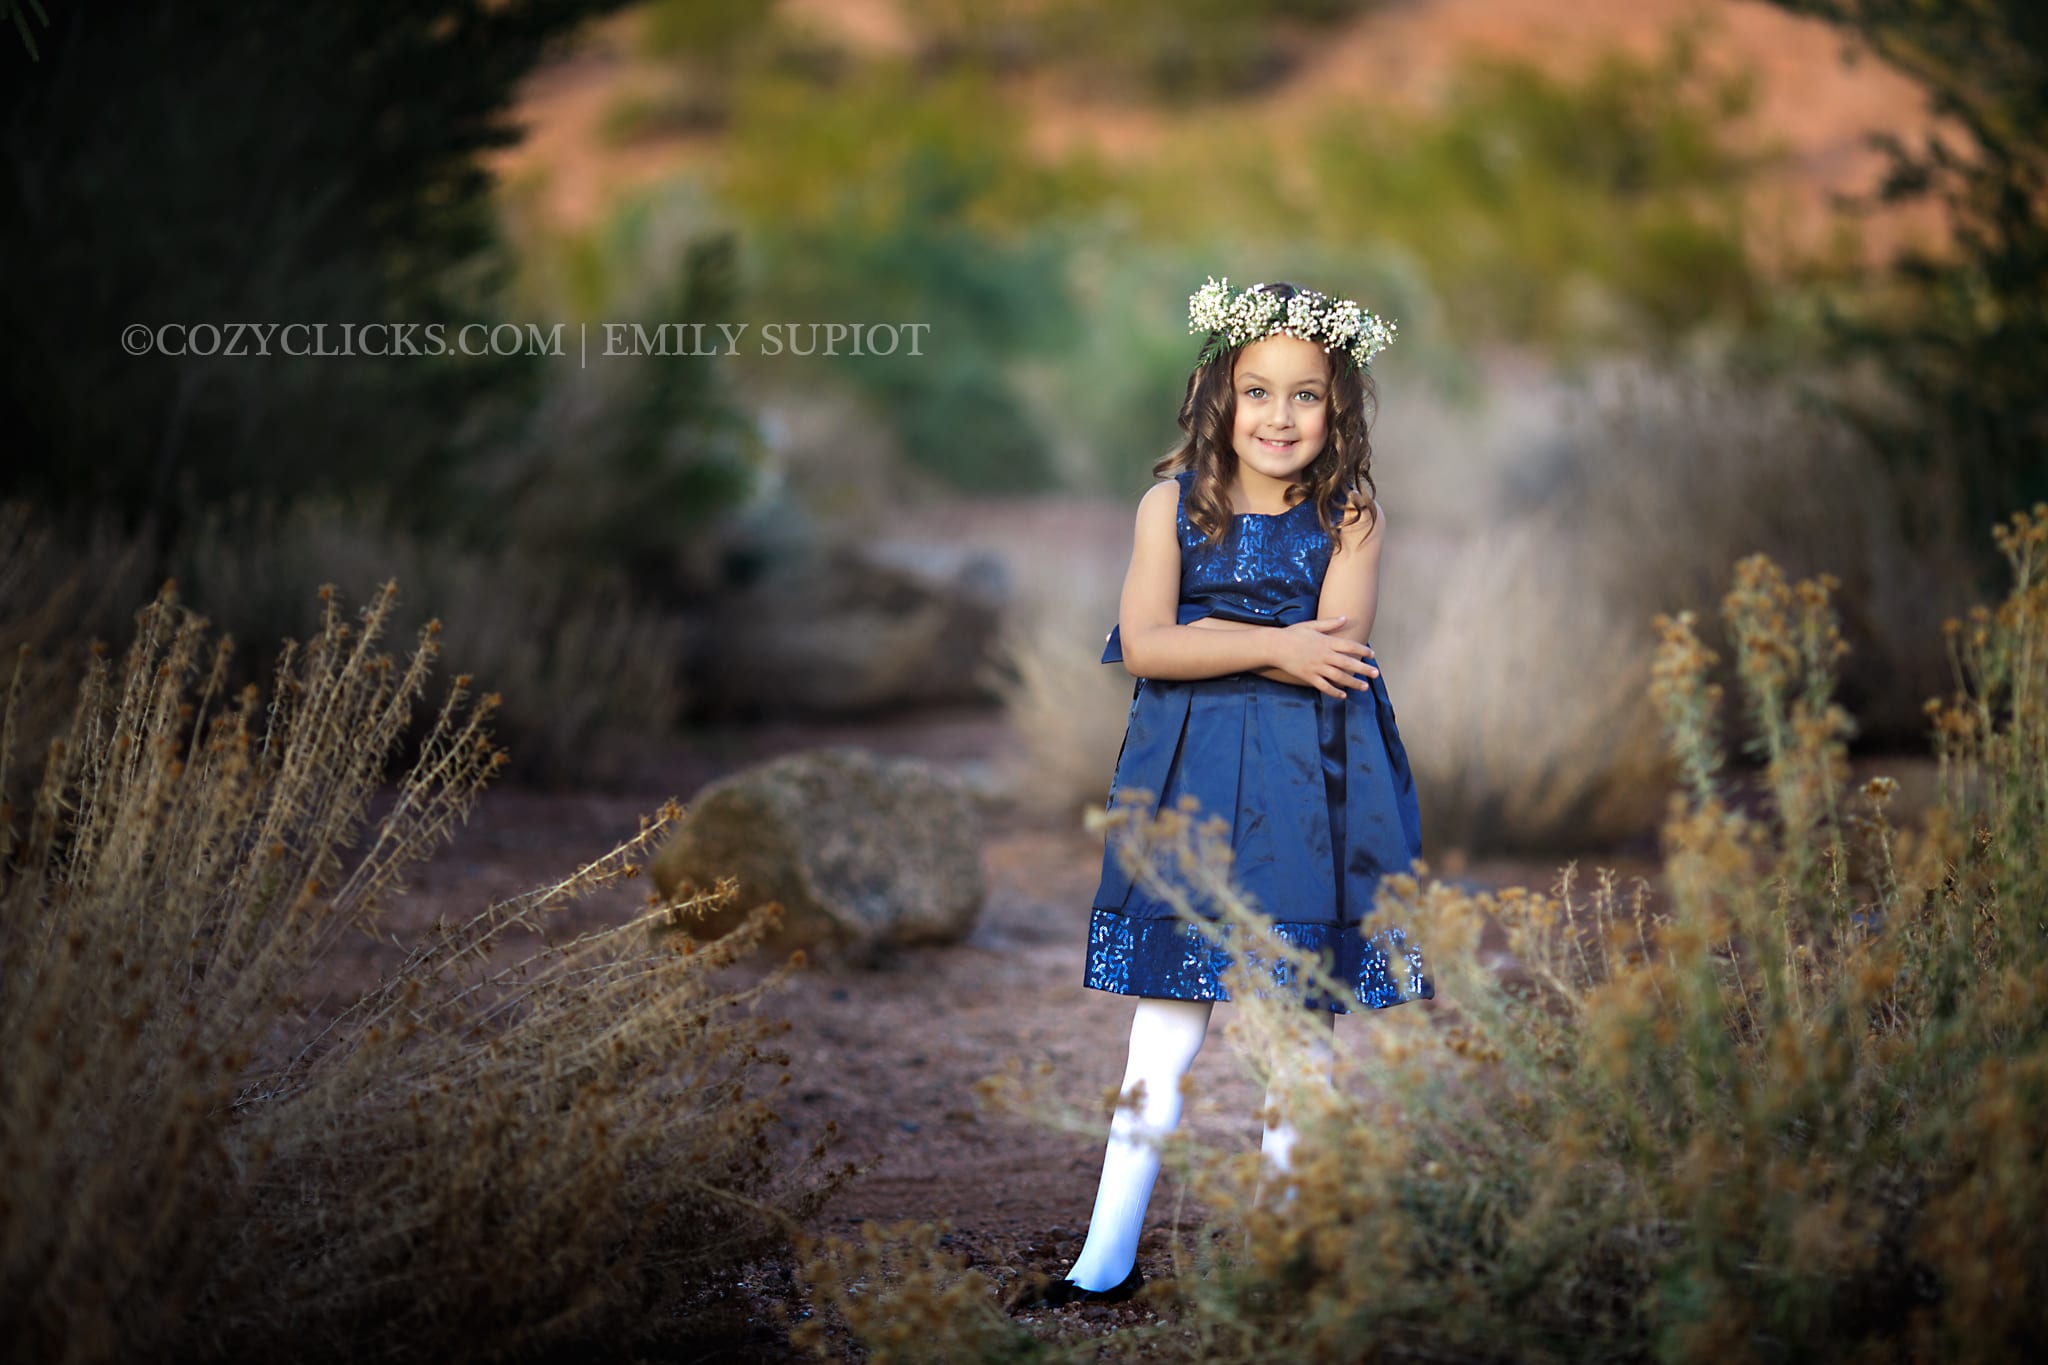 Child Photography at Papago Park in Phoenix